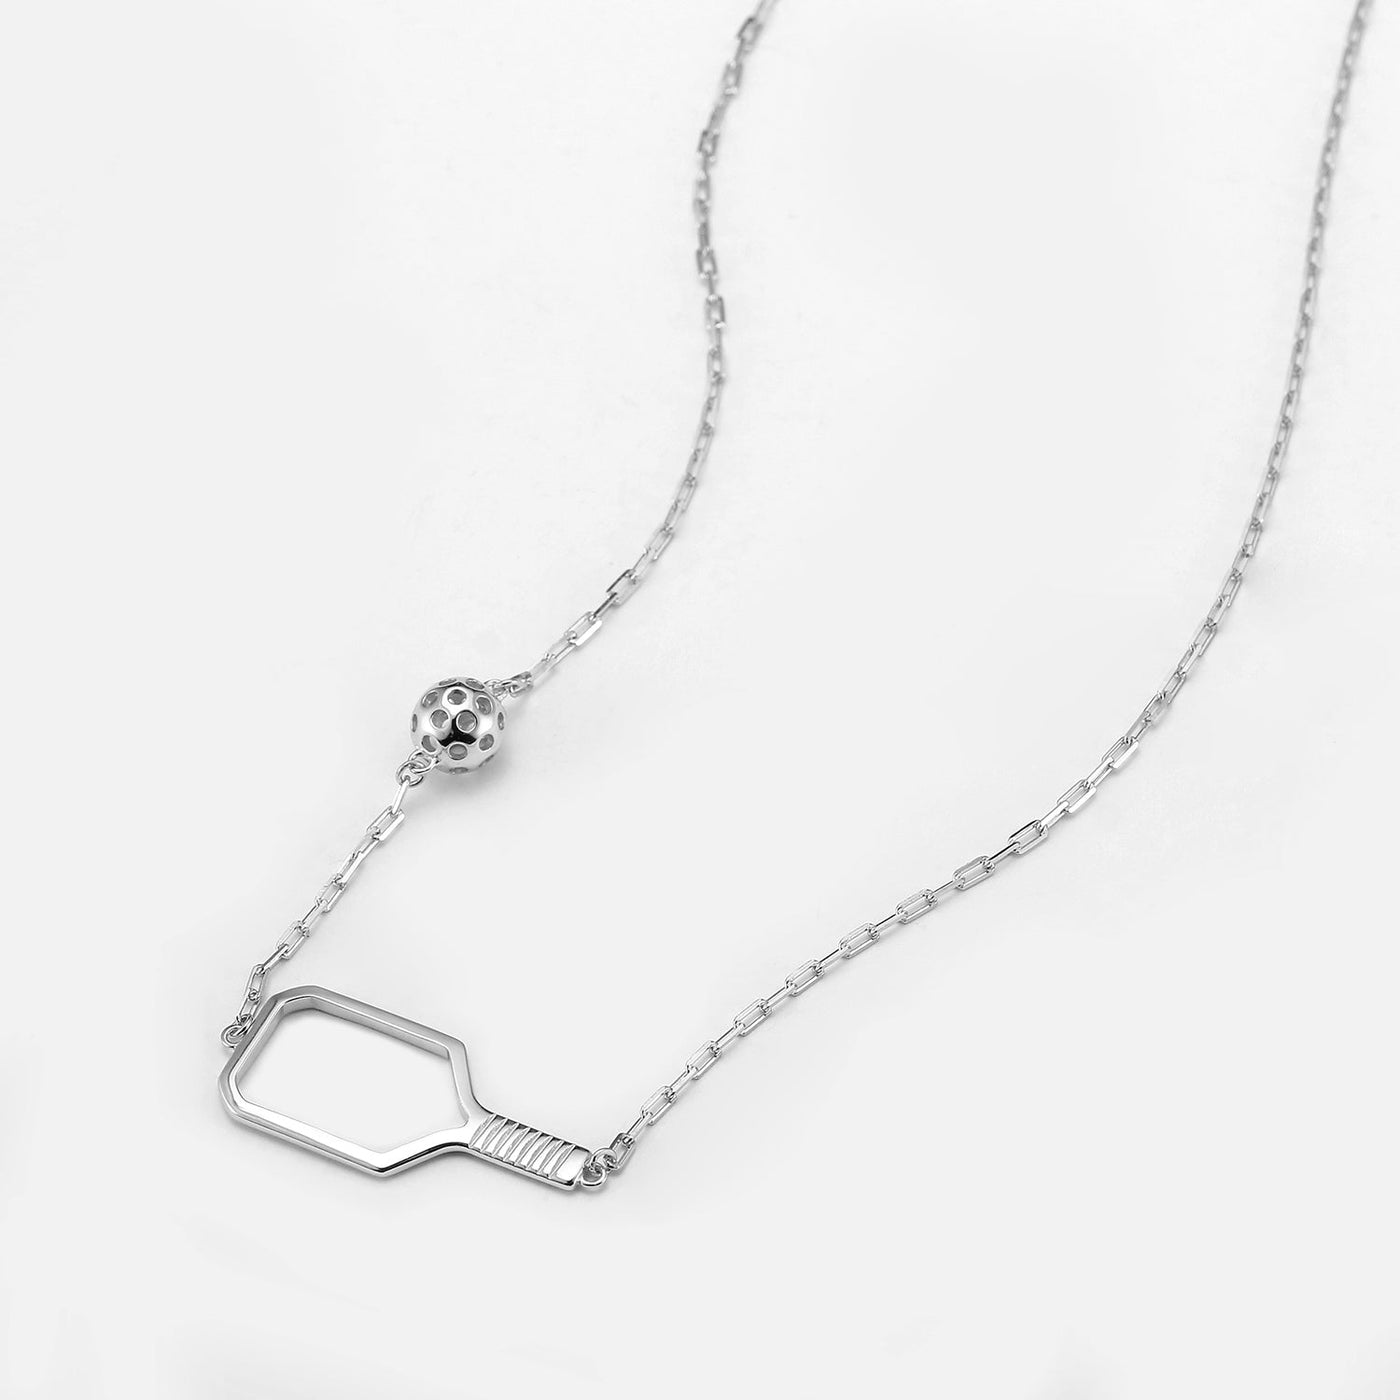 Pickleball Playset Silver Necklace. A faceted gold open concept paddle sits like an elegant pendant with the detailed pickleball resting up the chain. Made from sustainably sourced Sterling Silver with a protective rhodium overlay&nbsp; - comes on a modern paper clip chain.